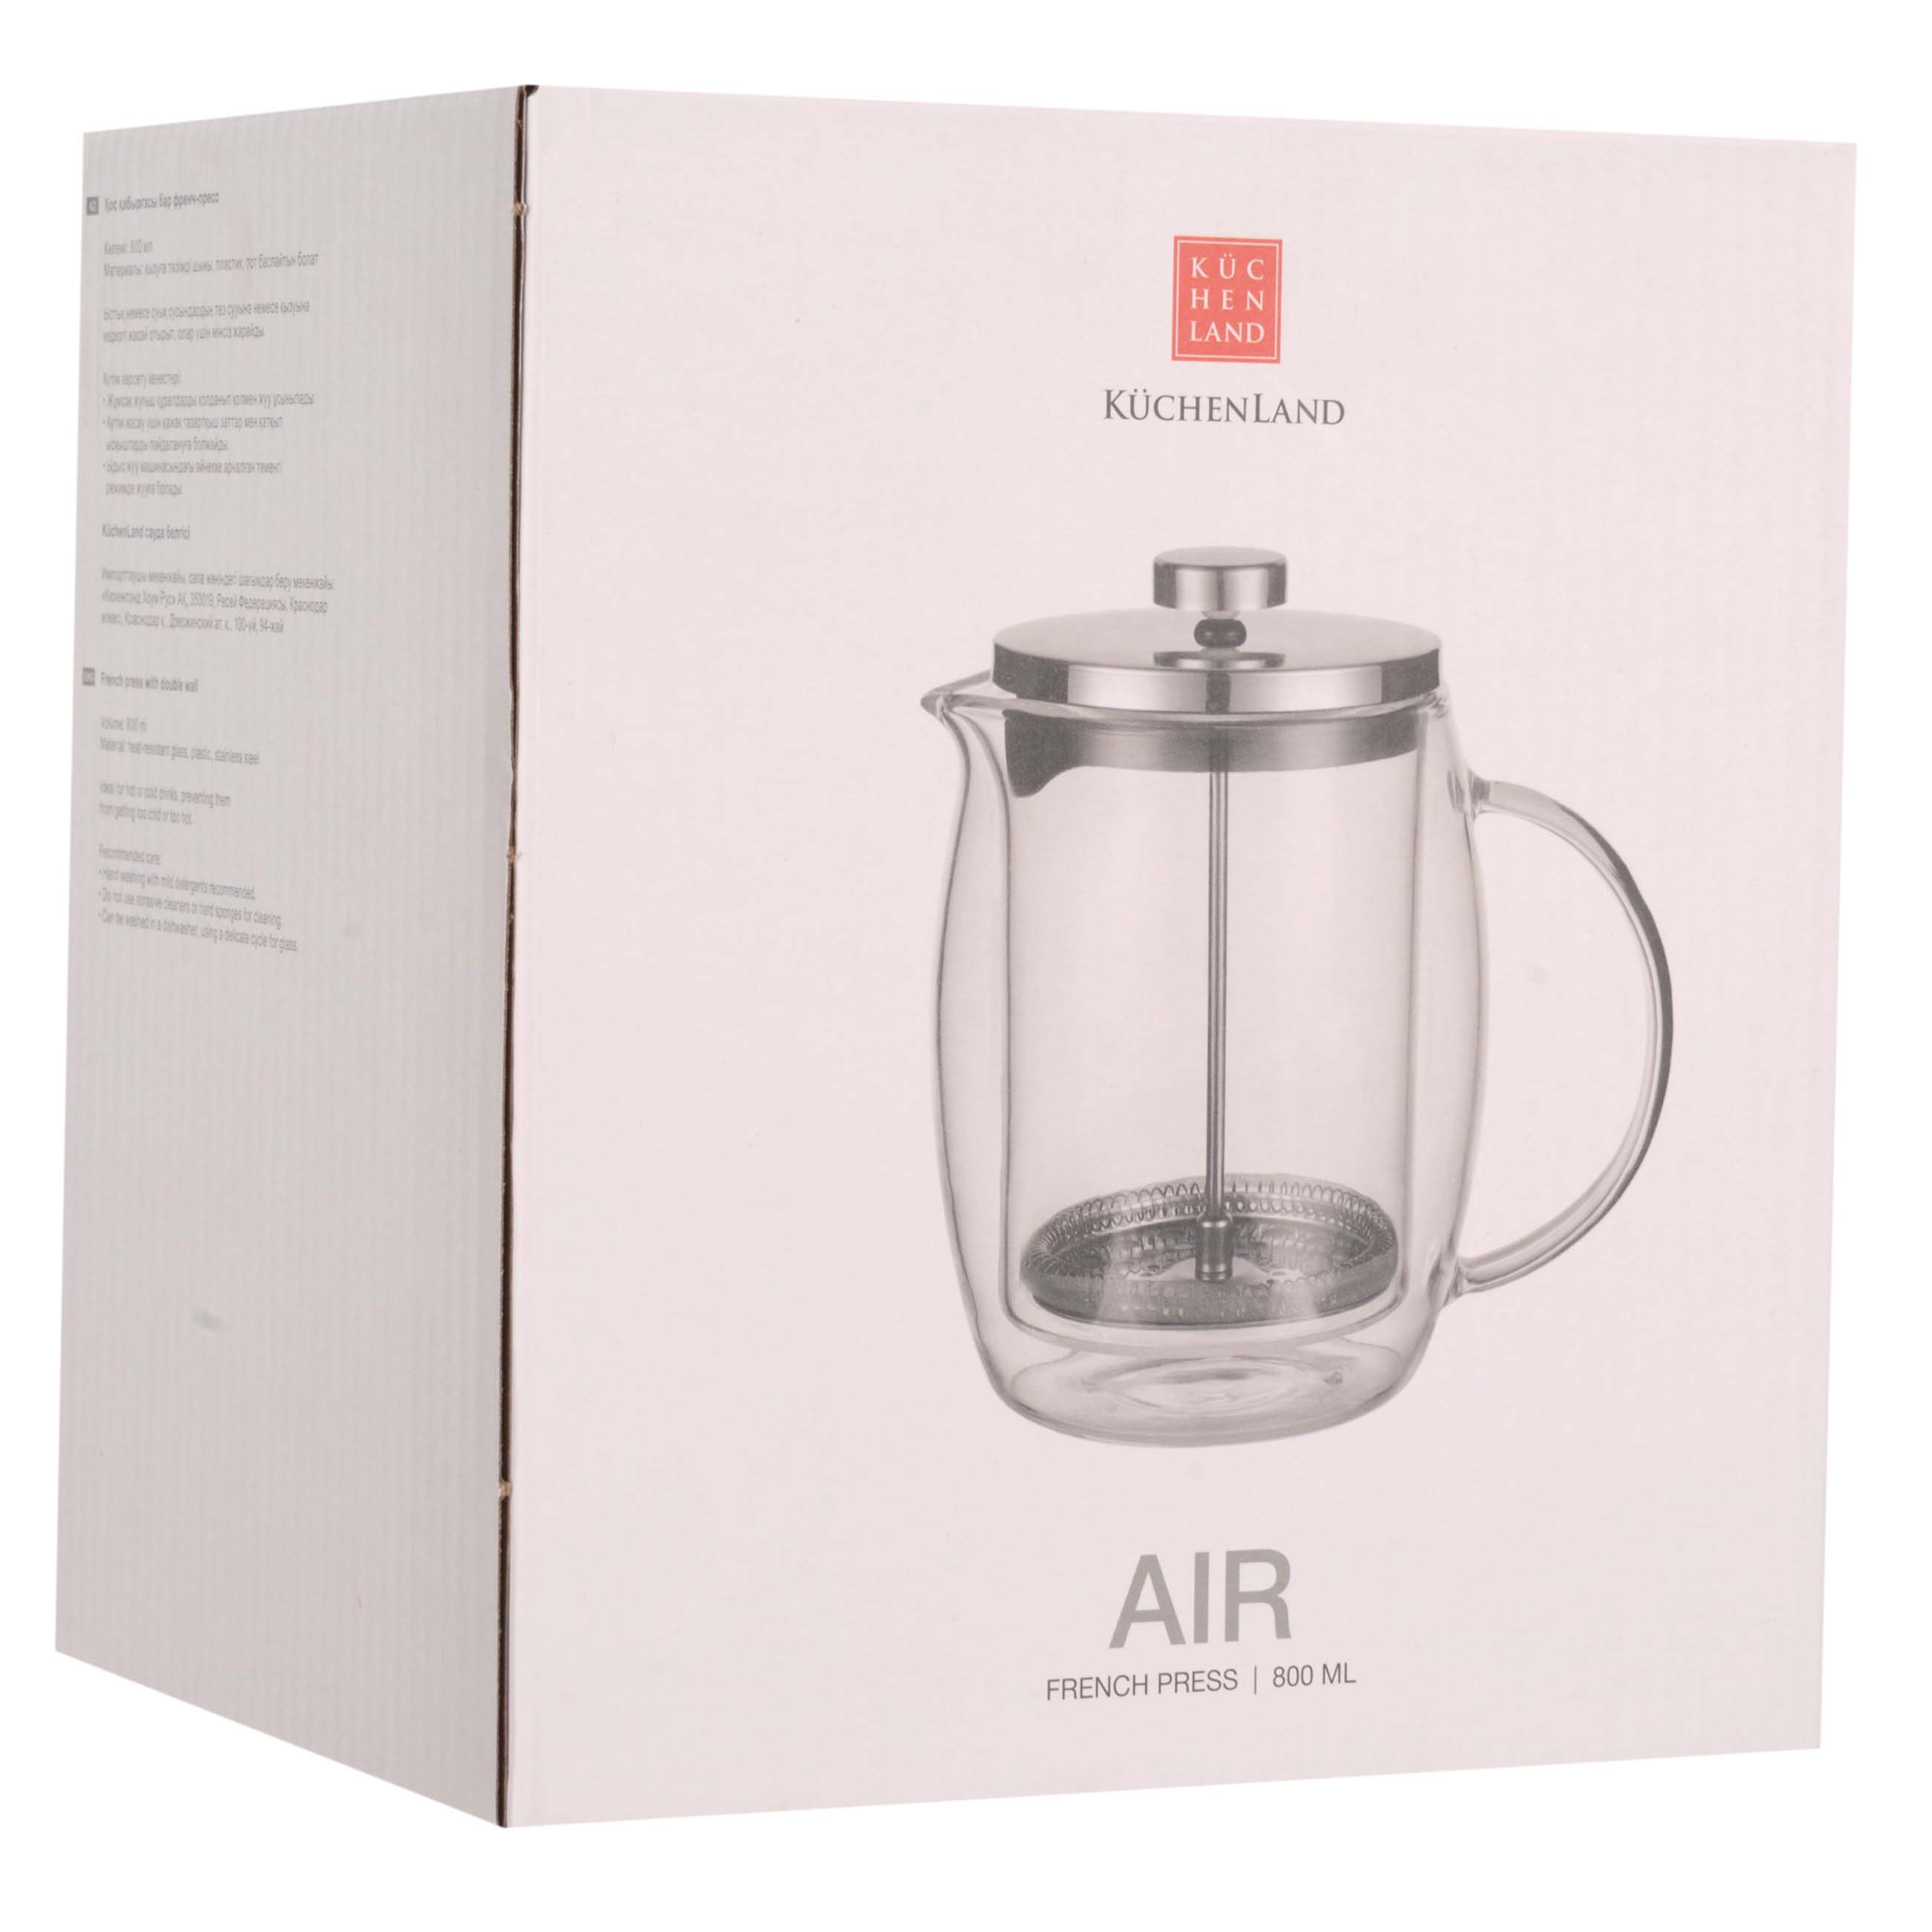 French press, 800 ml, used glass / steel, round, Air изображение № 2